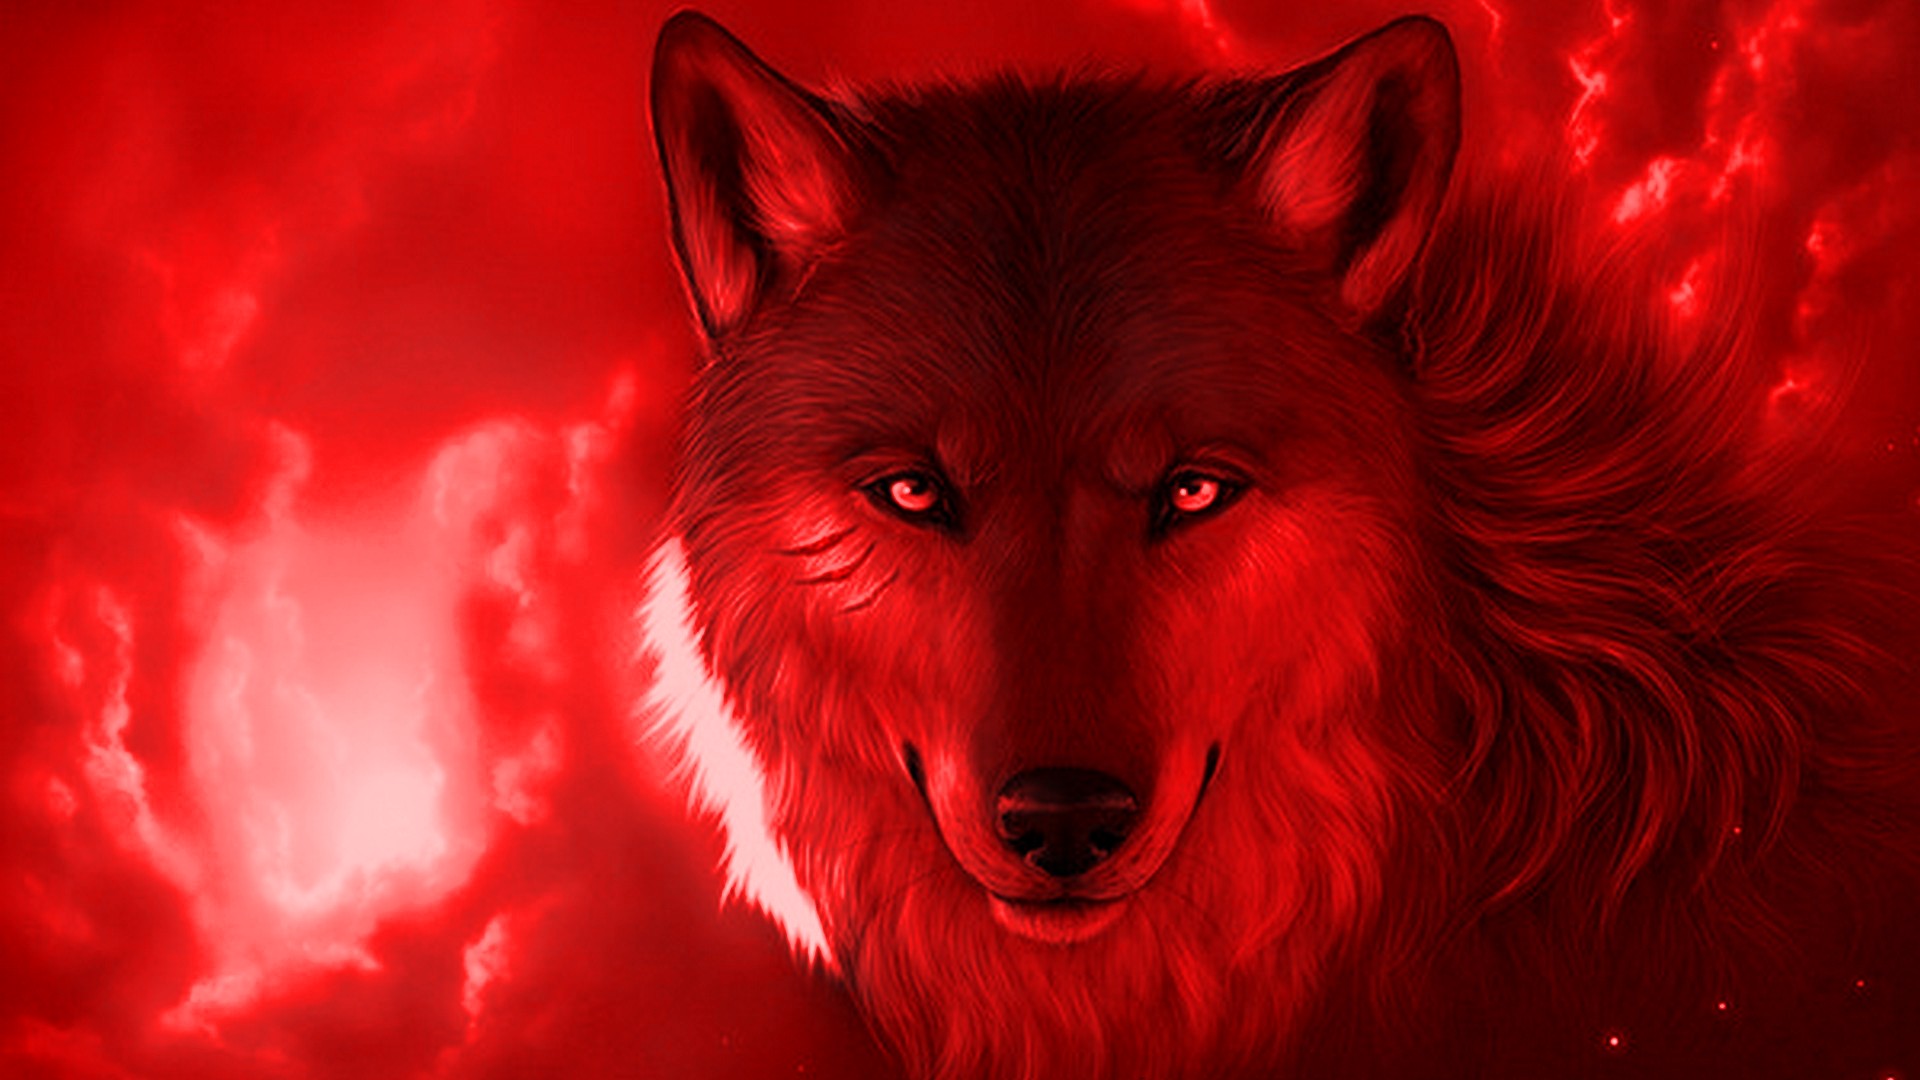 Wallpapers Computer Cool Wolf With high-resolution 1920X1080 pixel. You can use this wallpaper for your Desktop Computer Backgrounds, Mac Wallpapers, Android Lock screen or iPhone Screensavers and another smartphone device